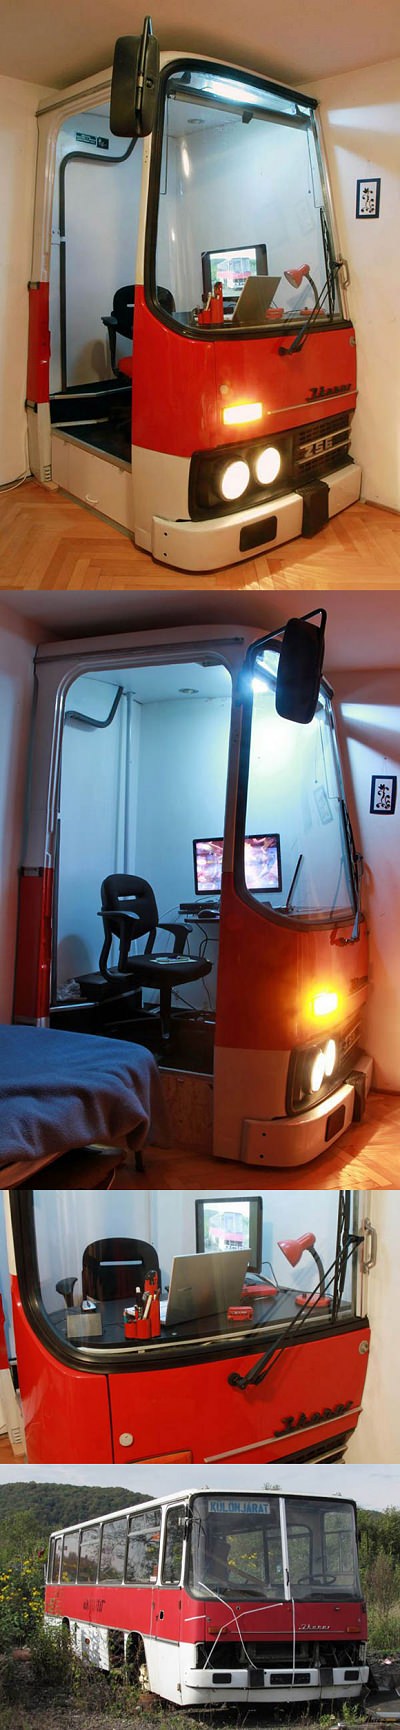 ↑ Old Hungarian Bus Turned into Modern Office